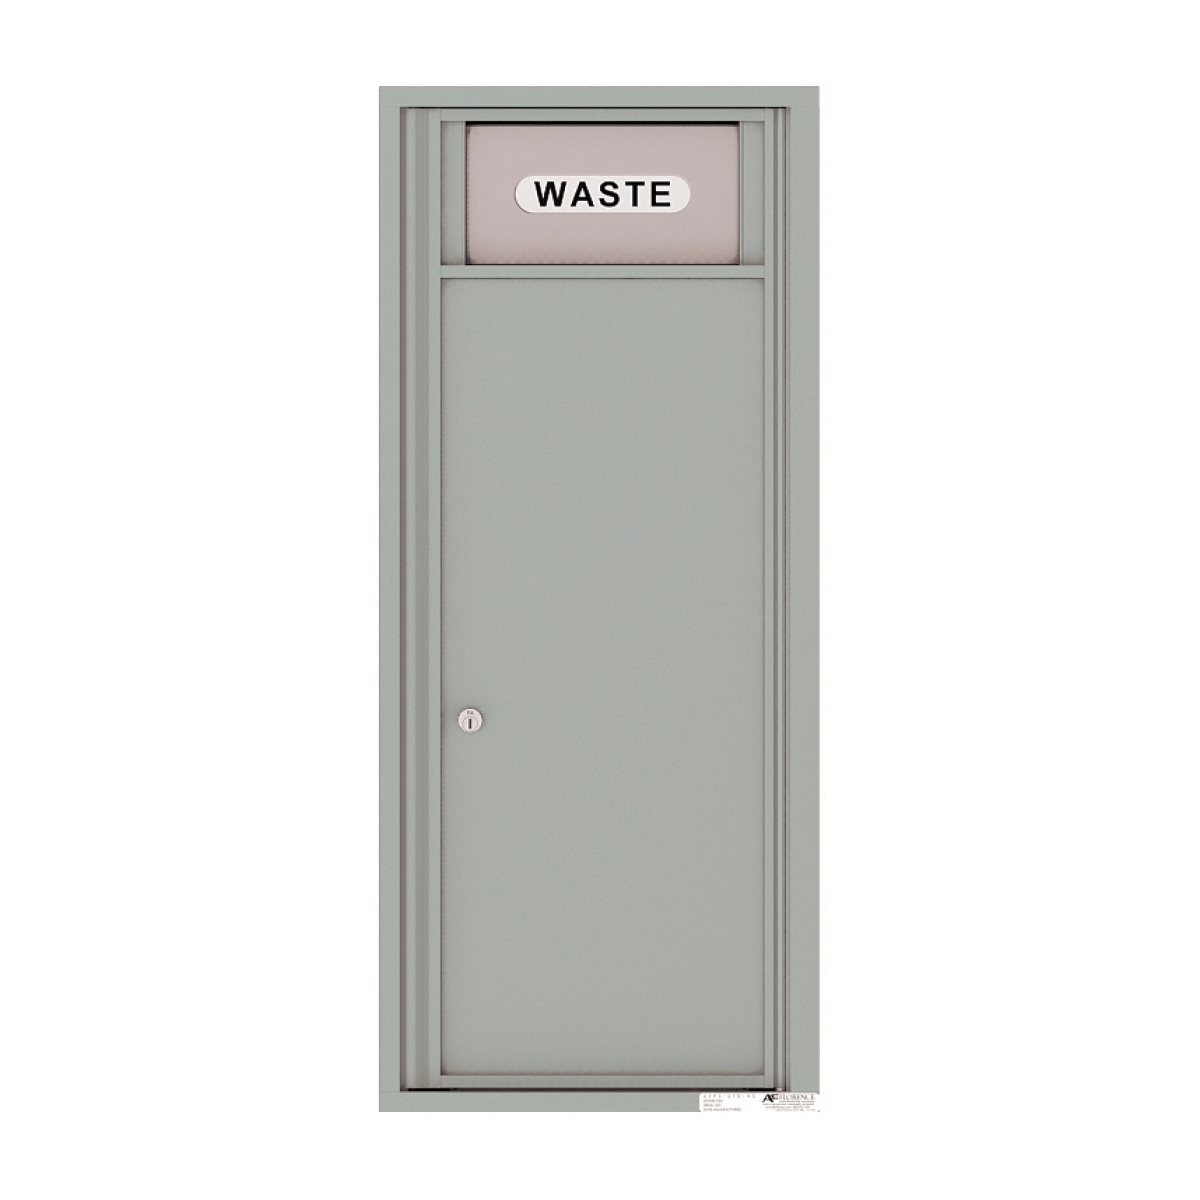 4C Mailboxes 4C12S-Bin Trash and Recycling Bin Product Image